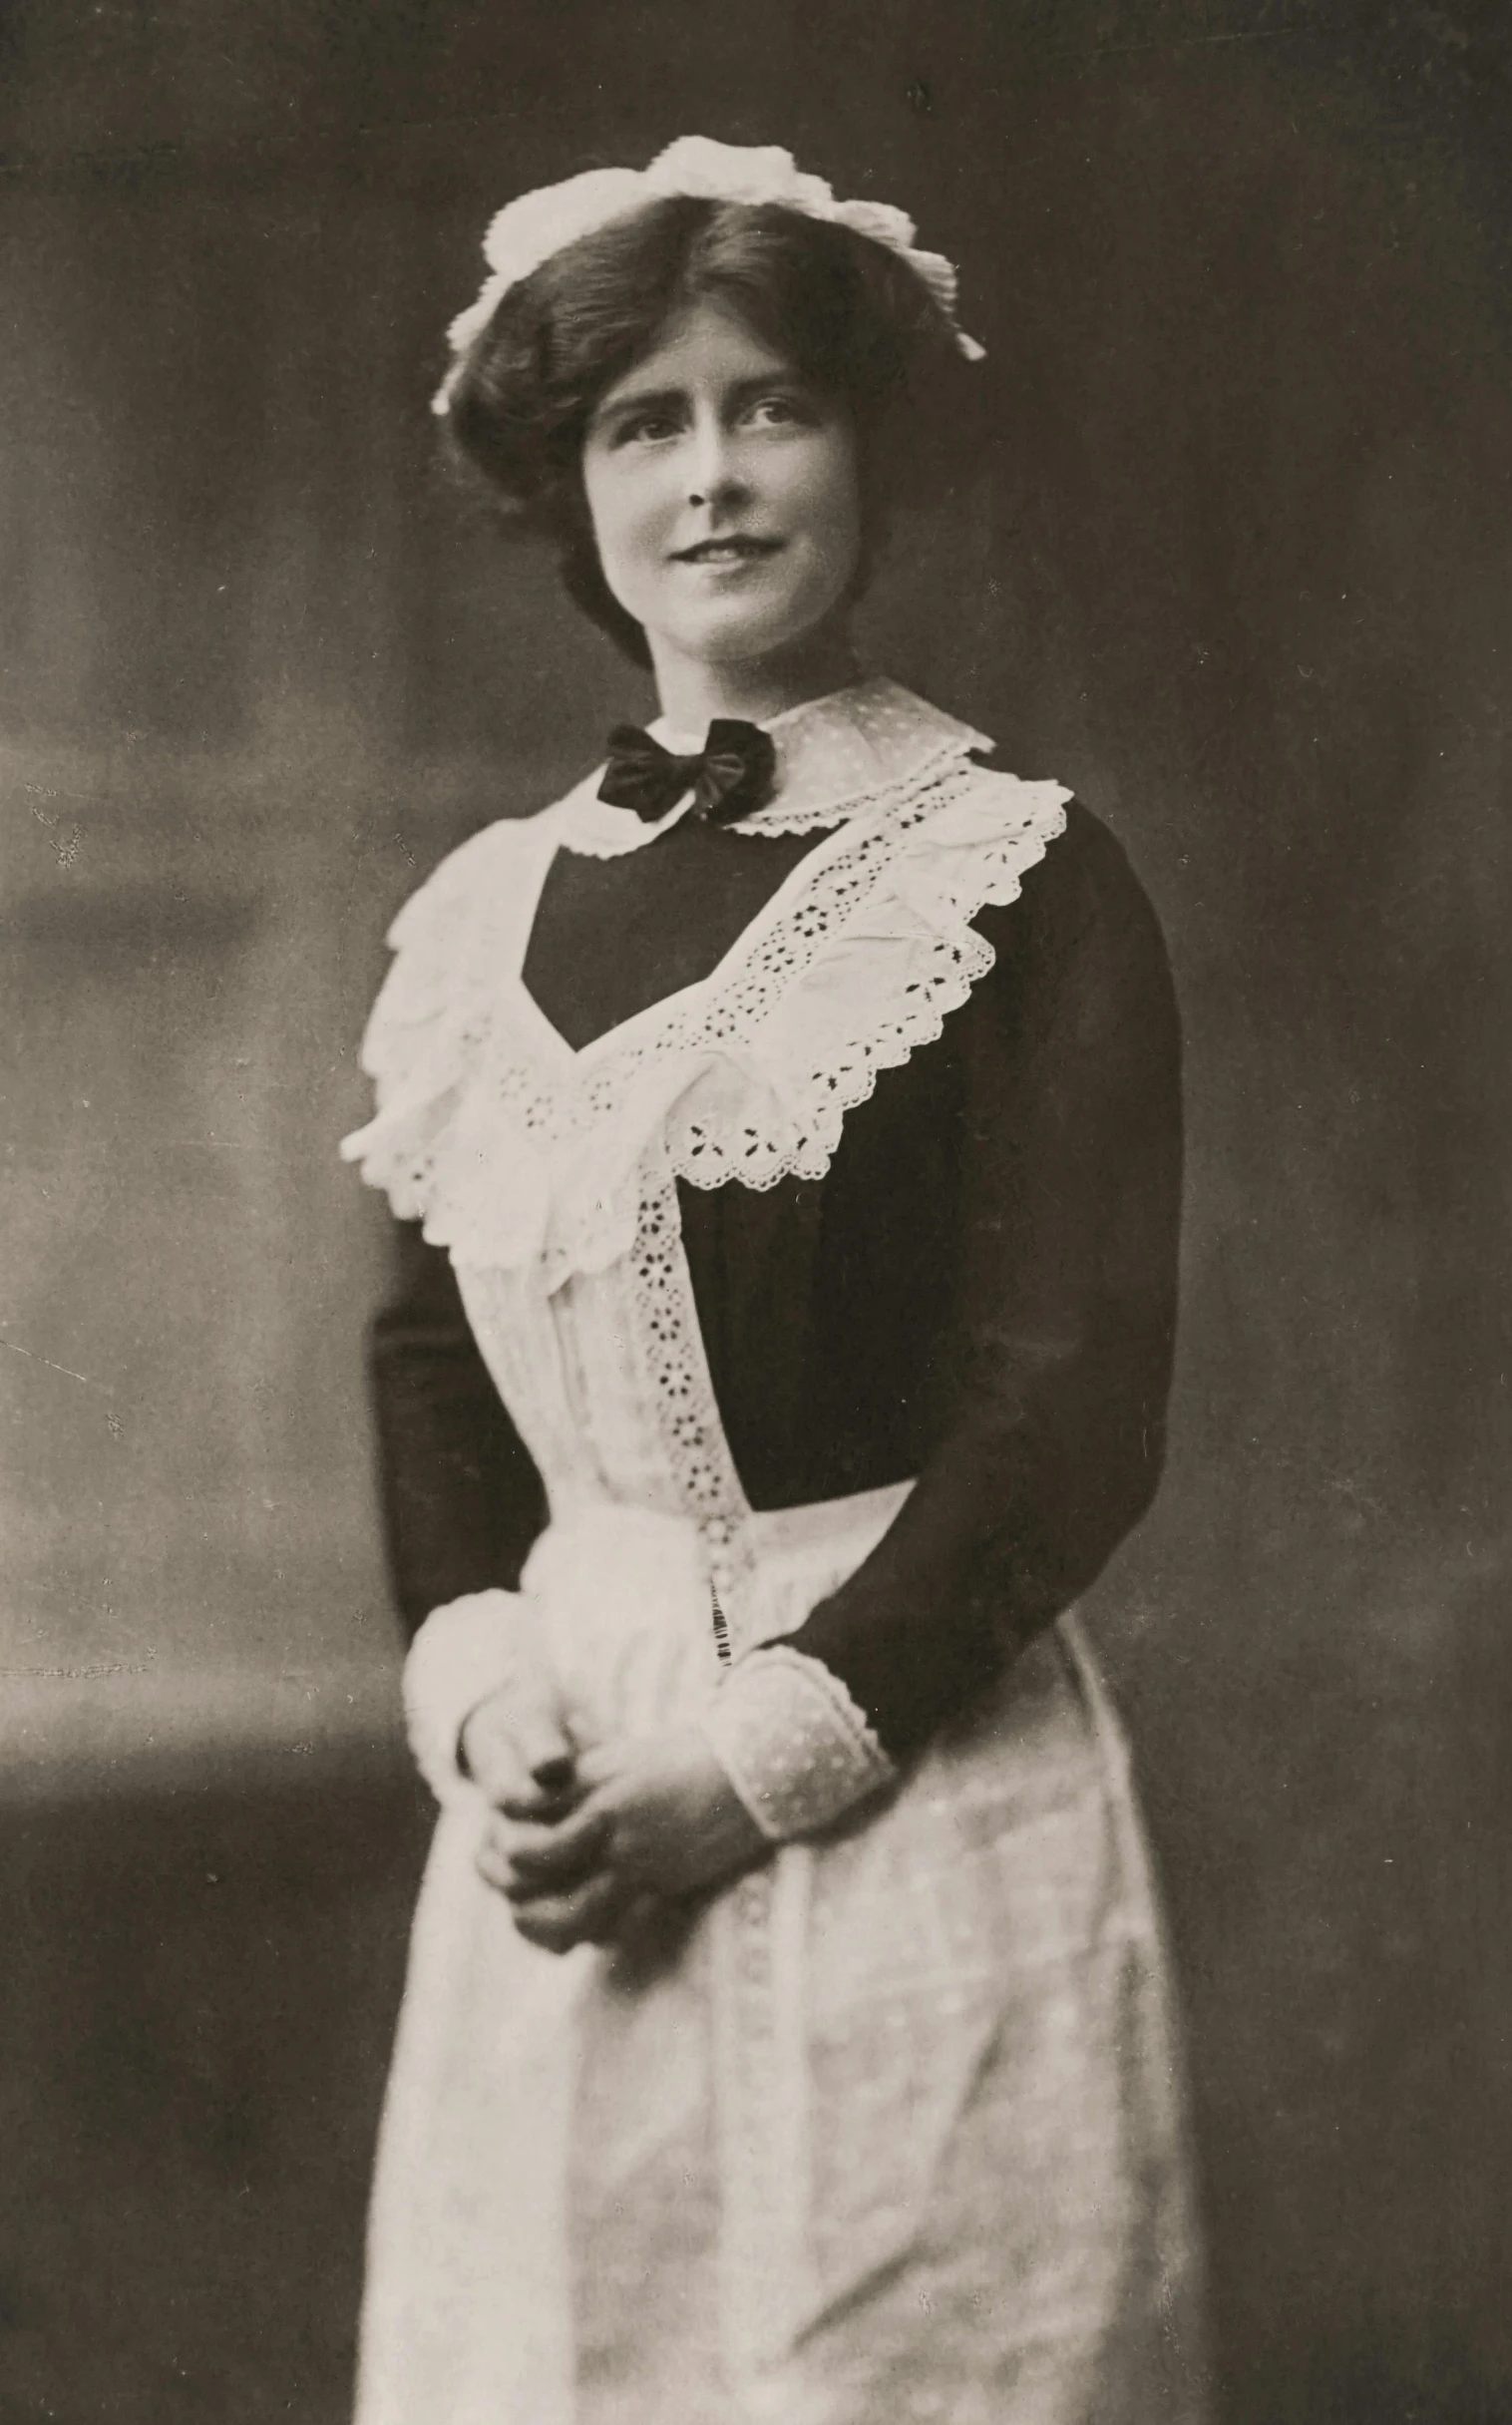 a woman wearing an apron with lace around the collar